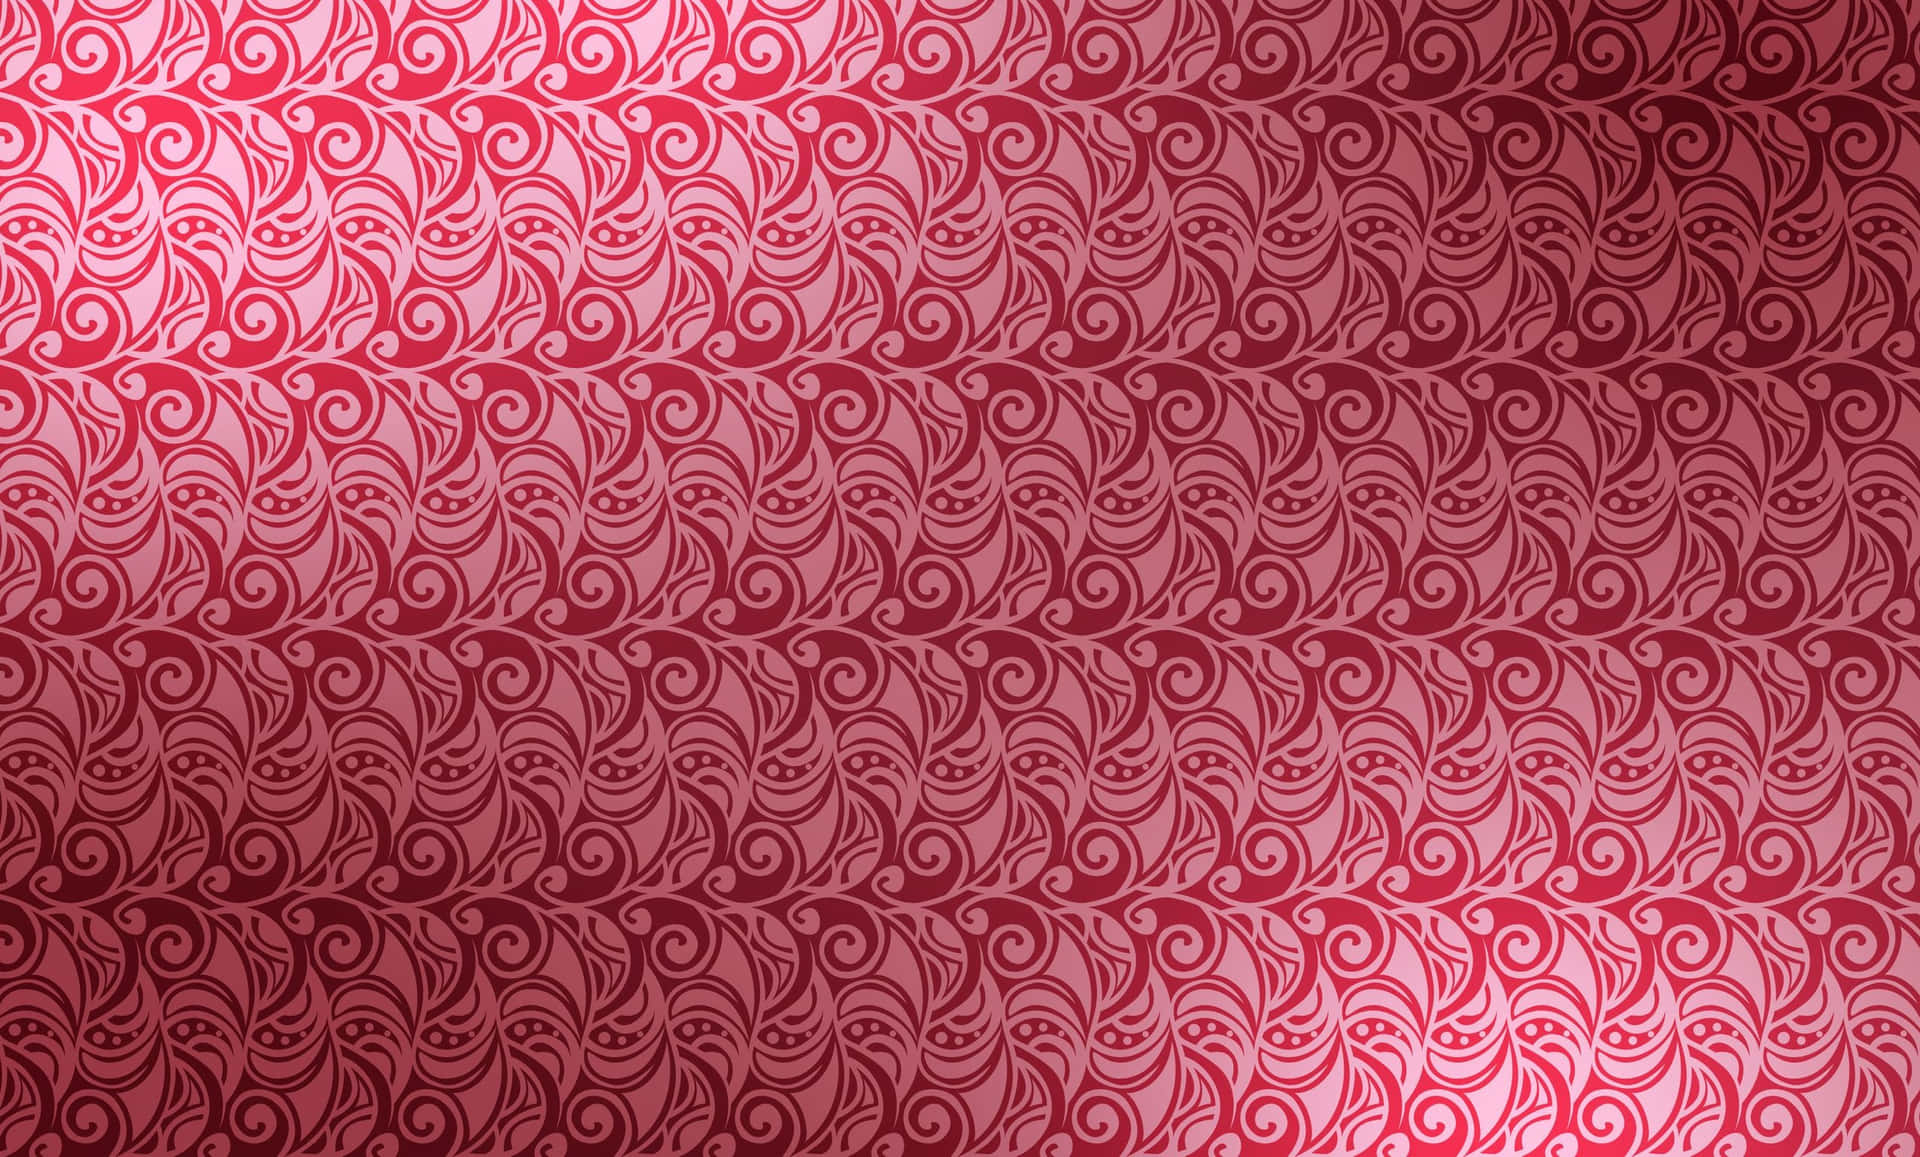 A Red And White Swirl Pattern Wallpaper